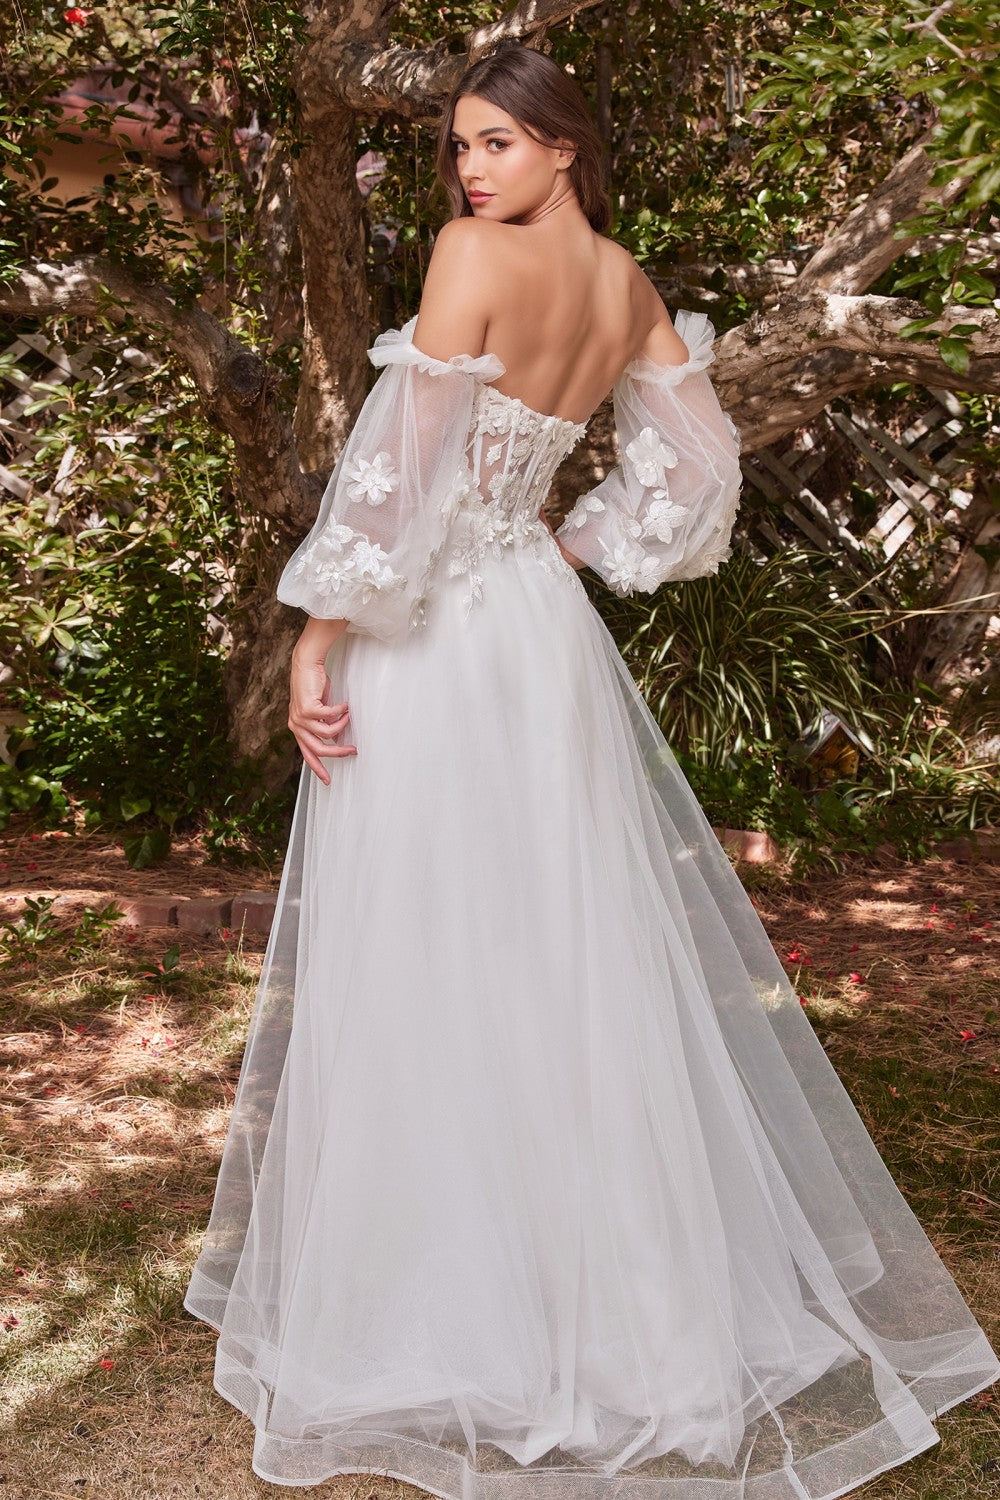 Cut from layers of tulle, this princess gown features a sheer tulle corseted bodice, detachable off-the-shoulder blouson sleeves, and a lightly gathered skirt with flowing proportions. The bodice is strategically embellished at the bust, waist and sleeves blooming with floral appliques. Its strapless sweetheart neckline is softened with a lace applique edge.